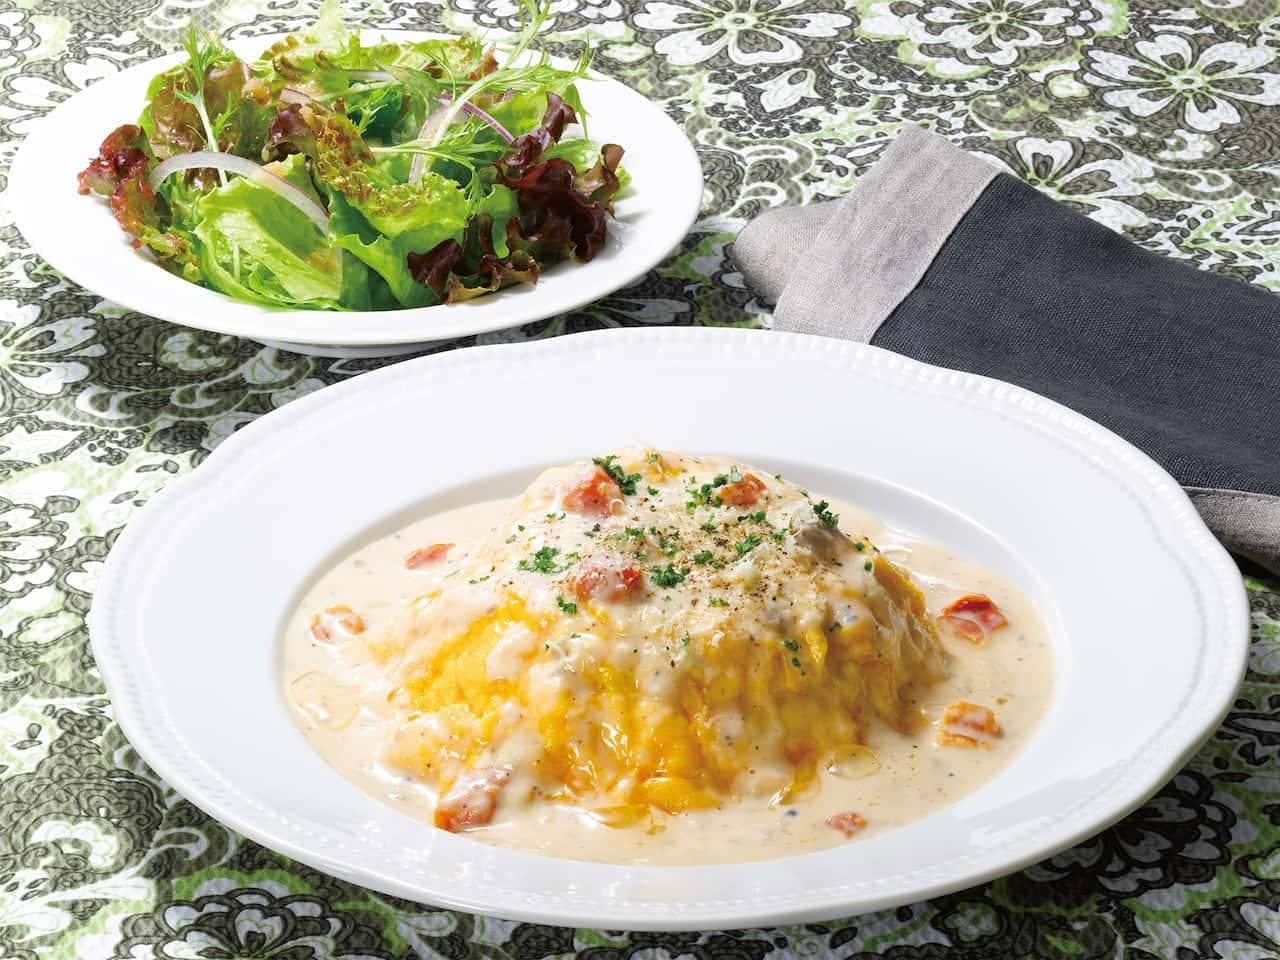 Royal Host "Weekday Lunchtime Limited Truffle Cream Omelet Rice Lunch with Salad